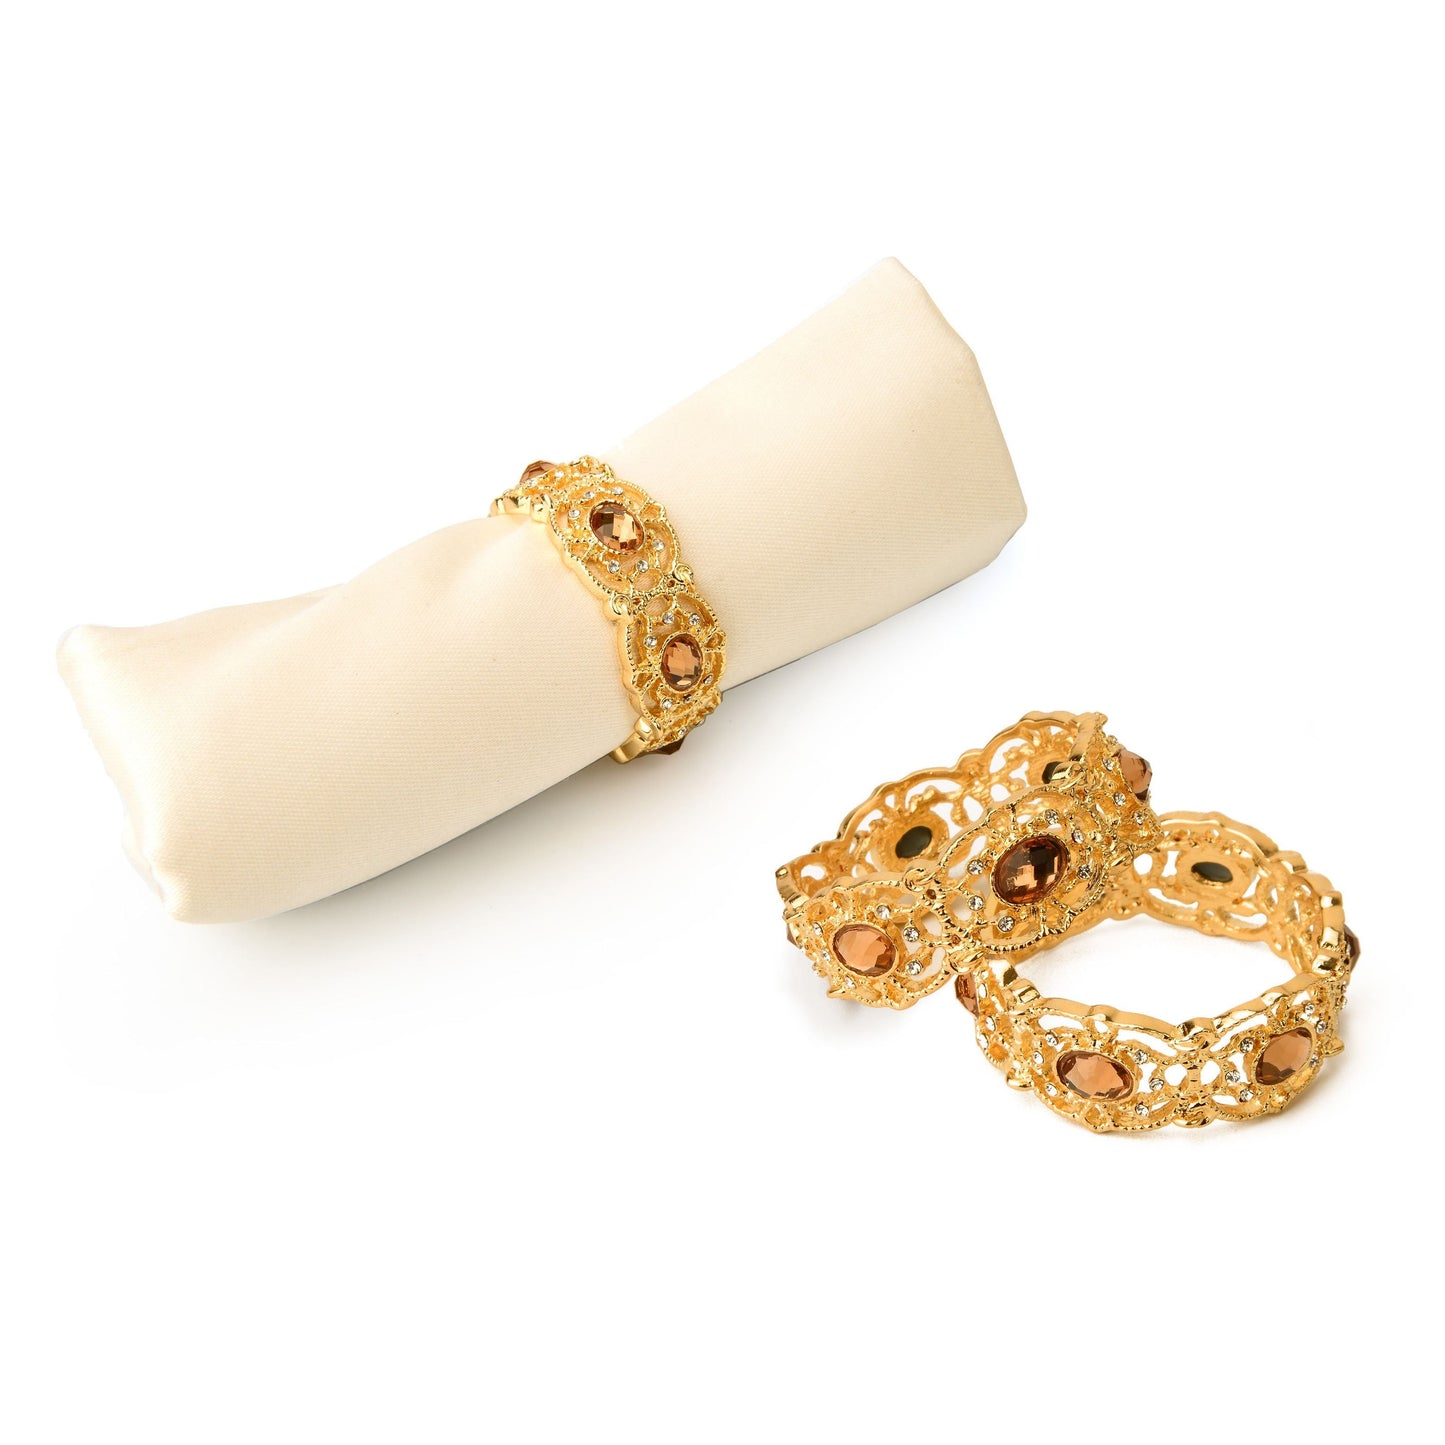 Classic Touch Decor Set Four Jeweled 24K Gold Napkin Rings, 2" x 2"